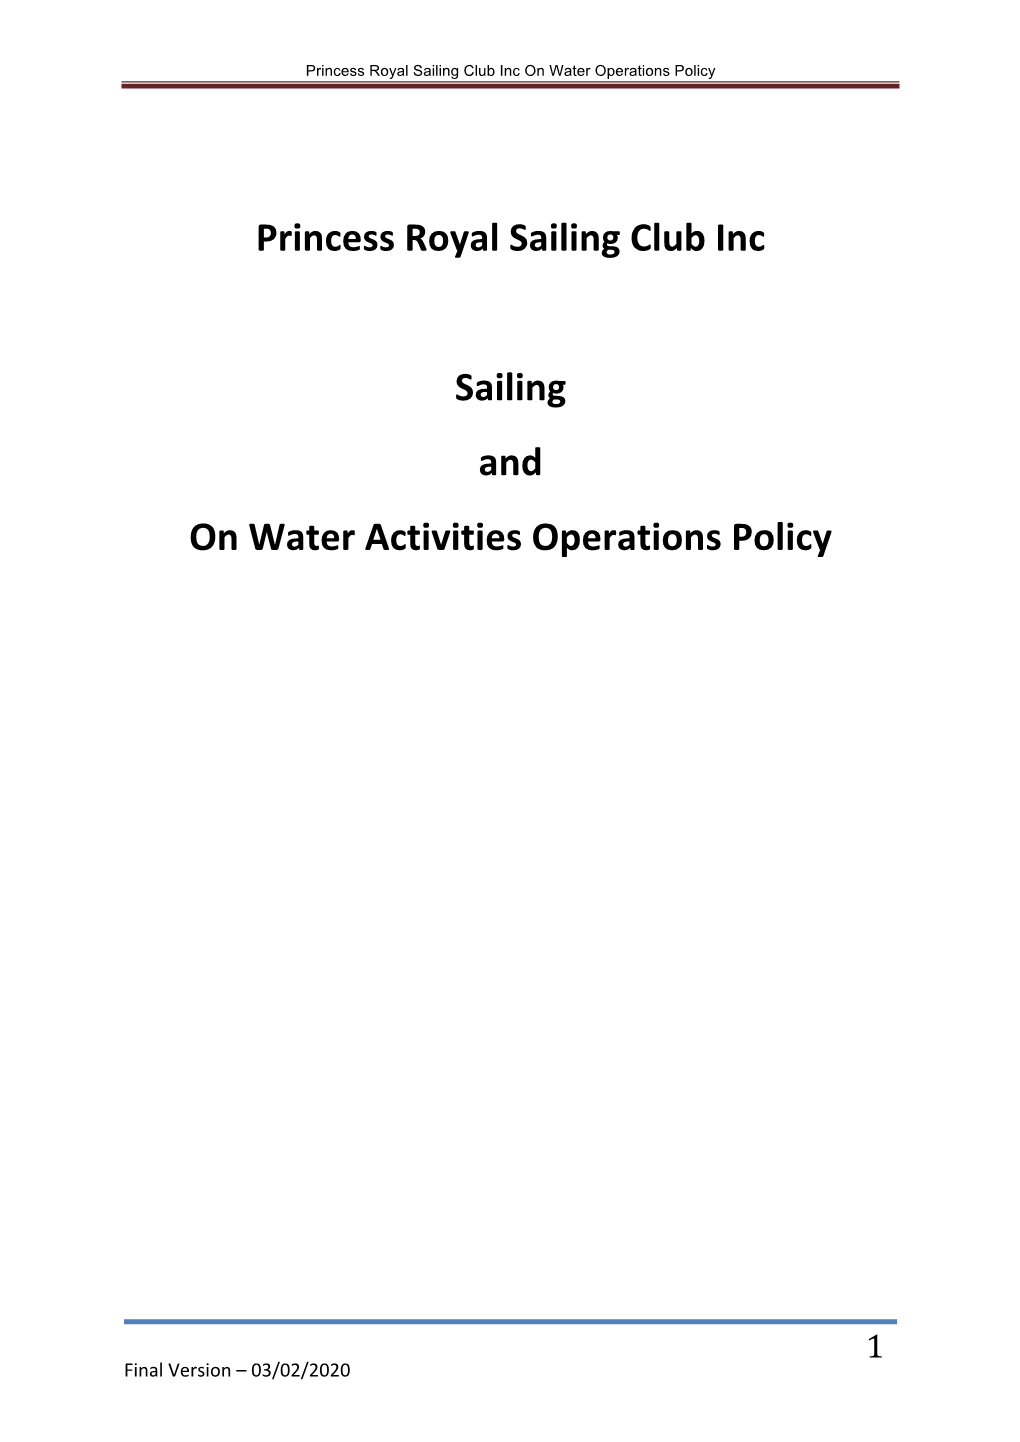 Sailing and on Water Activities Operations Policy